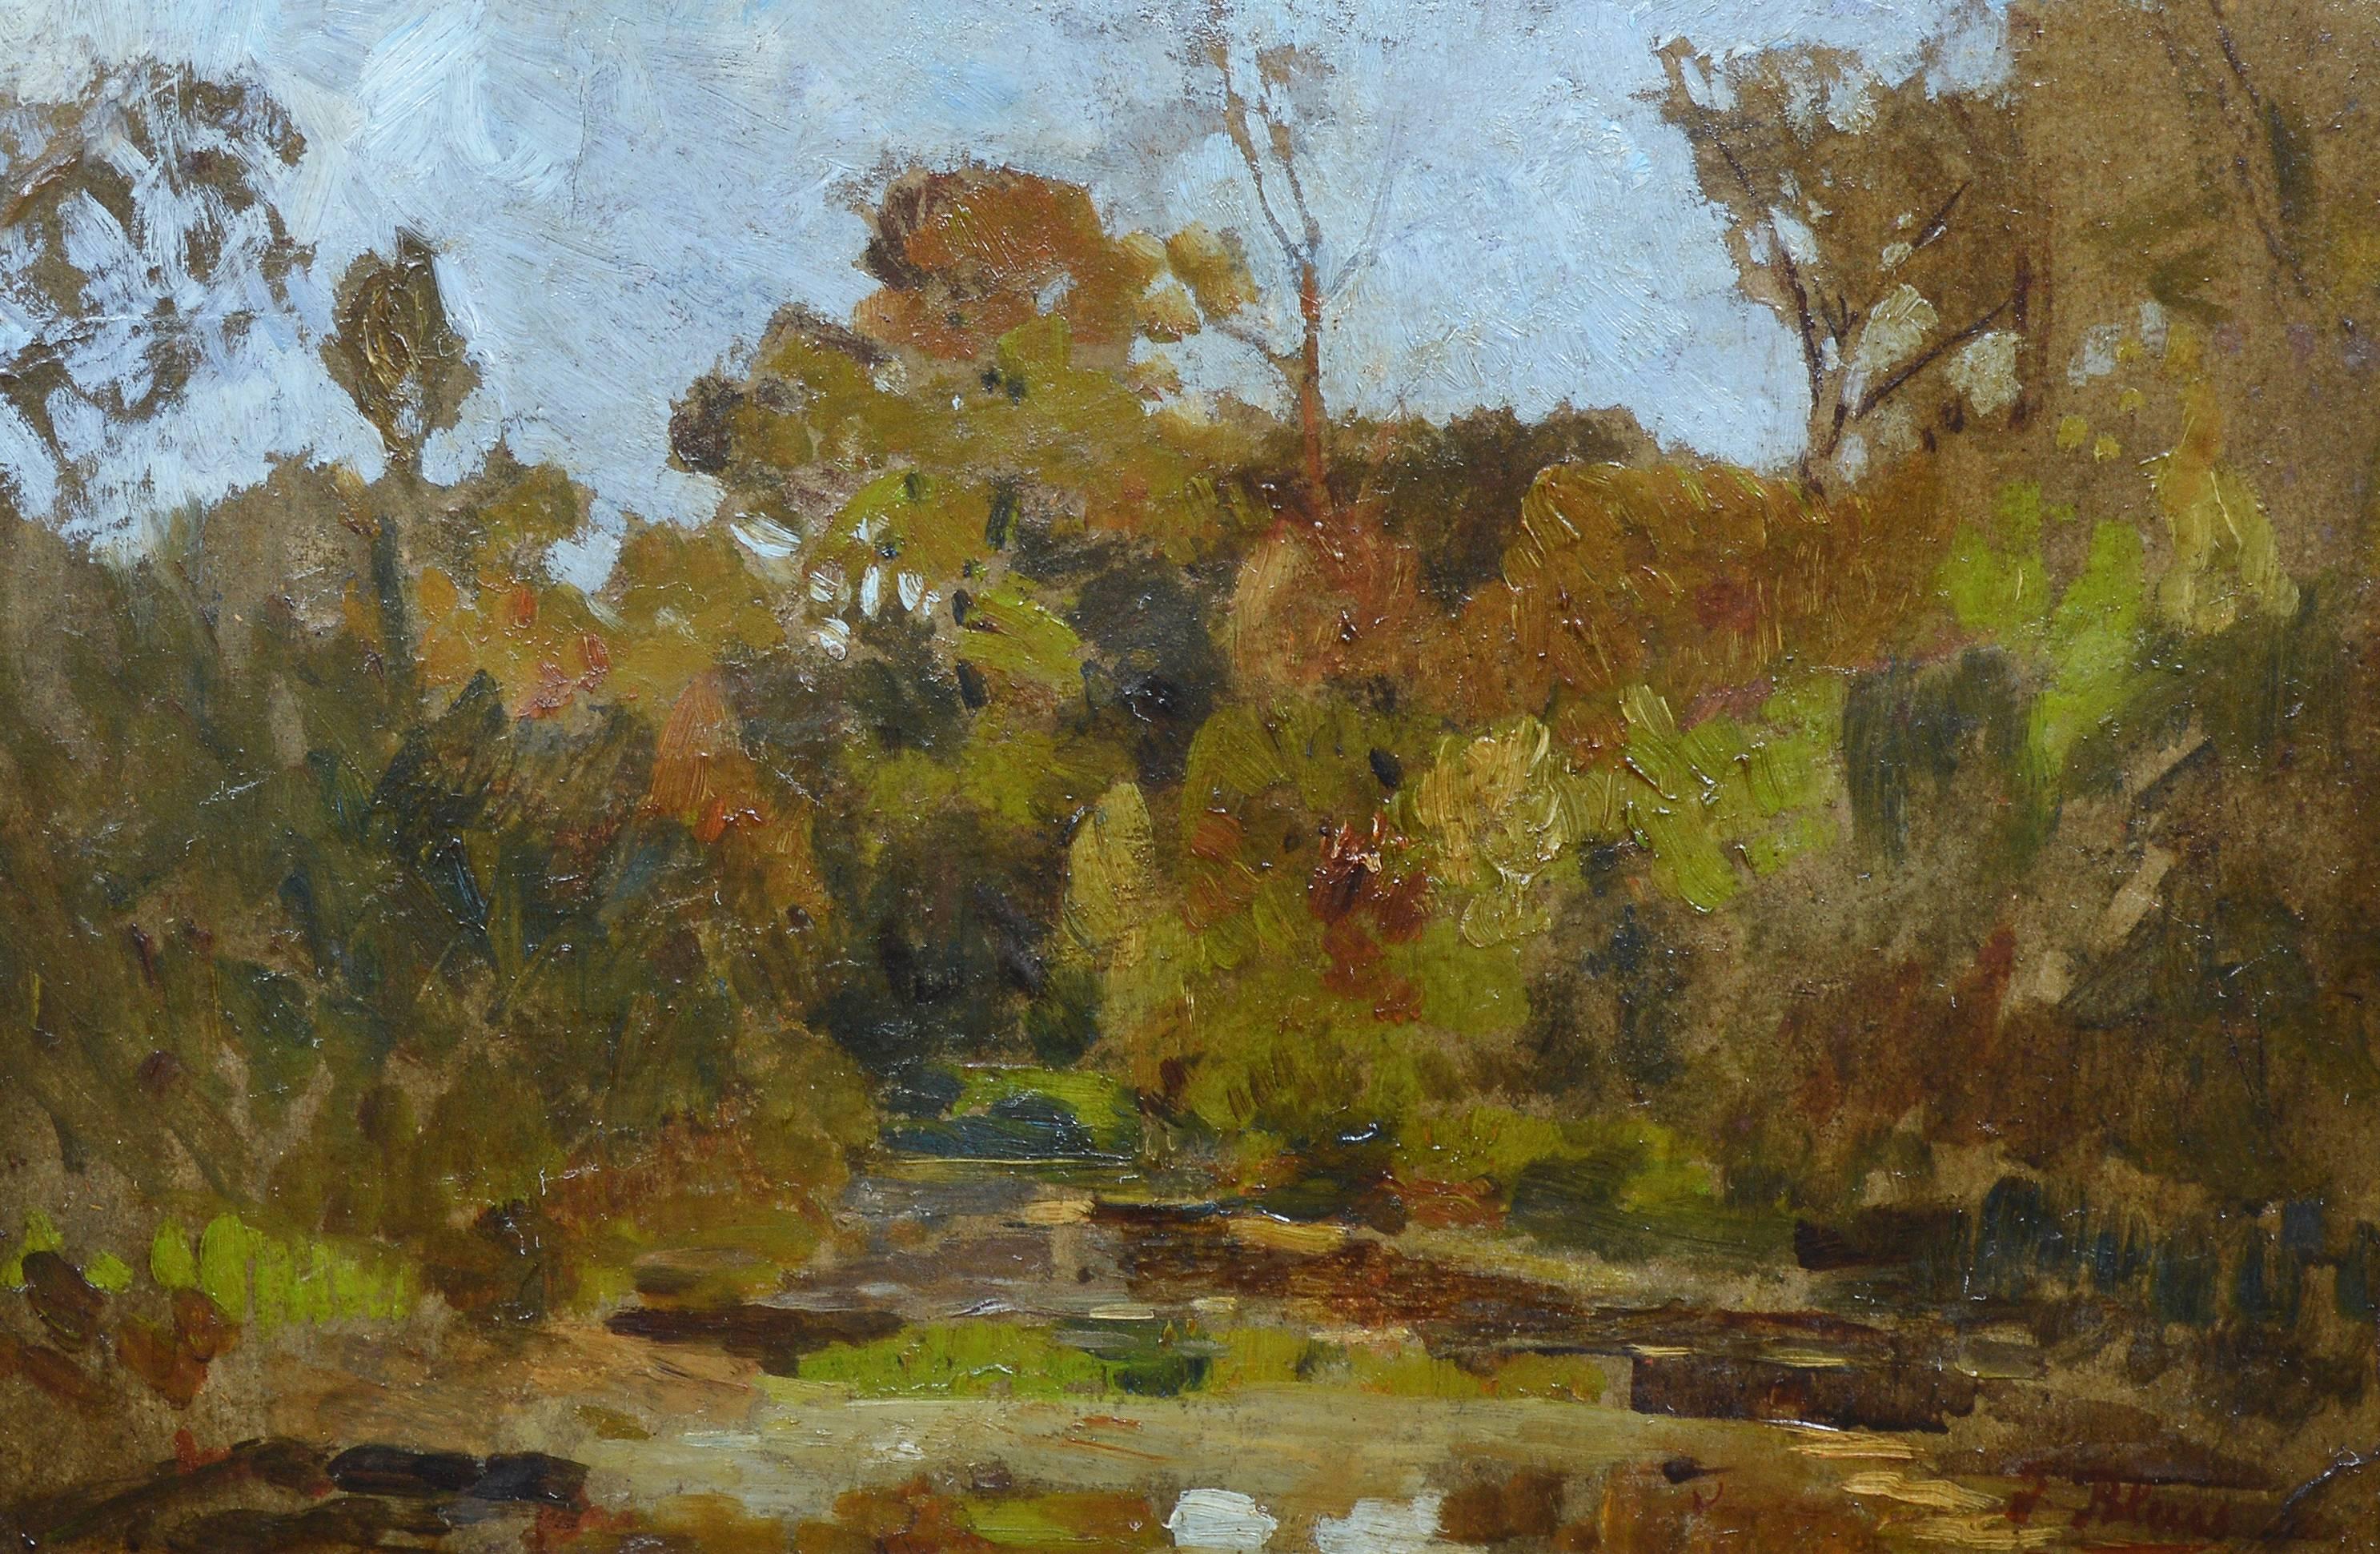 An impressionist style landscape by Tina Blau (1845-1916).  Oil on board, signed lower right.  Image size, 14.75